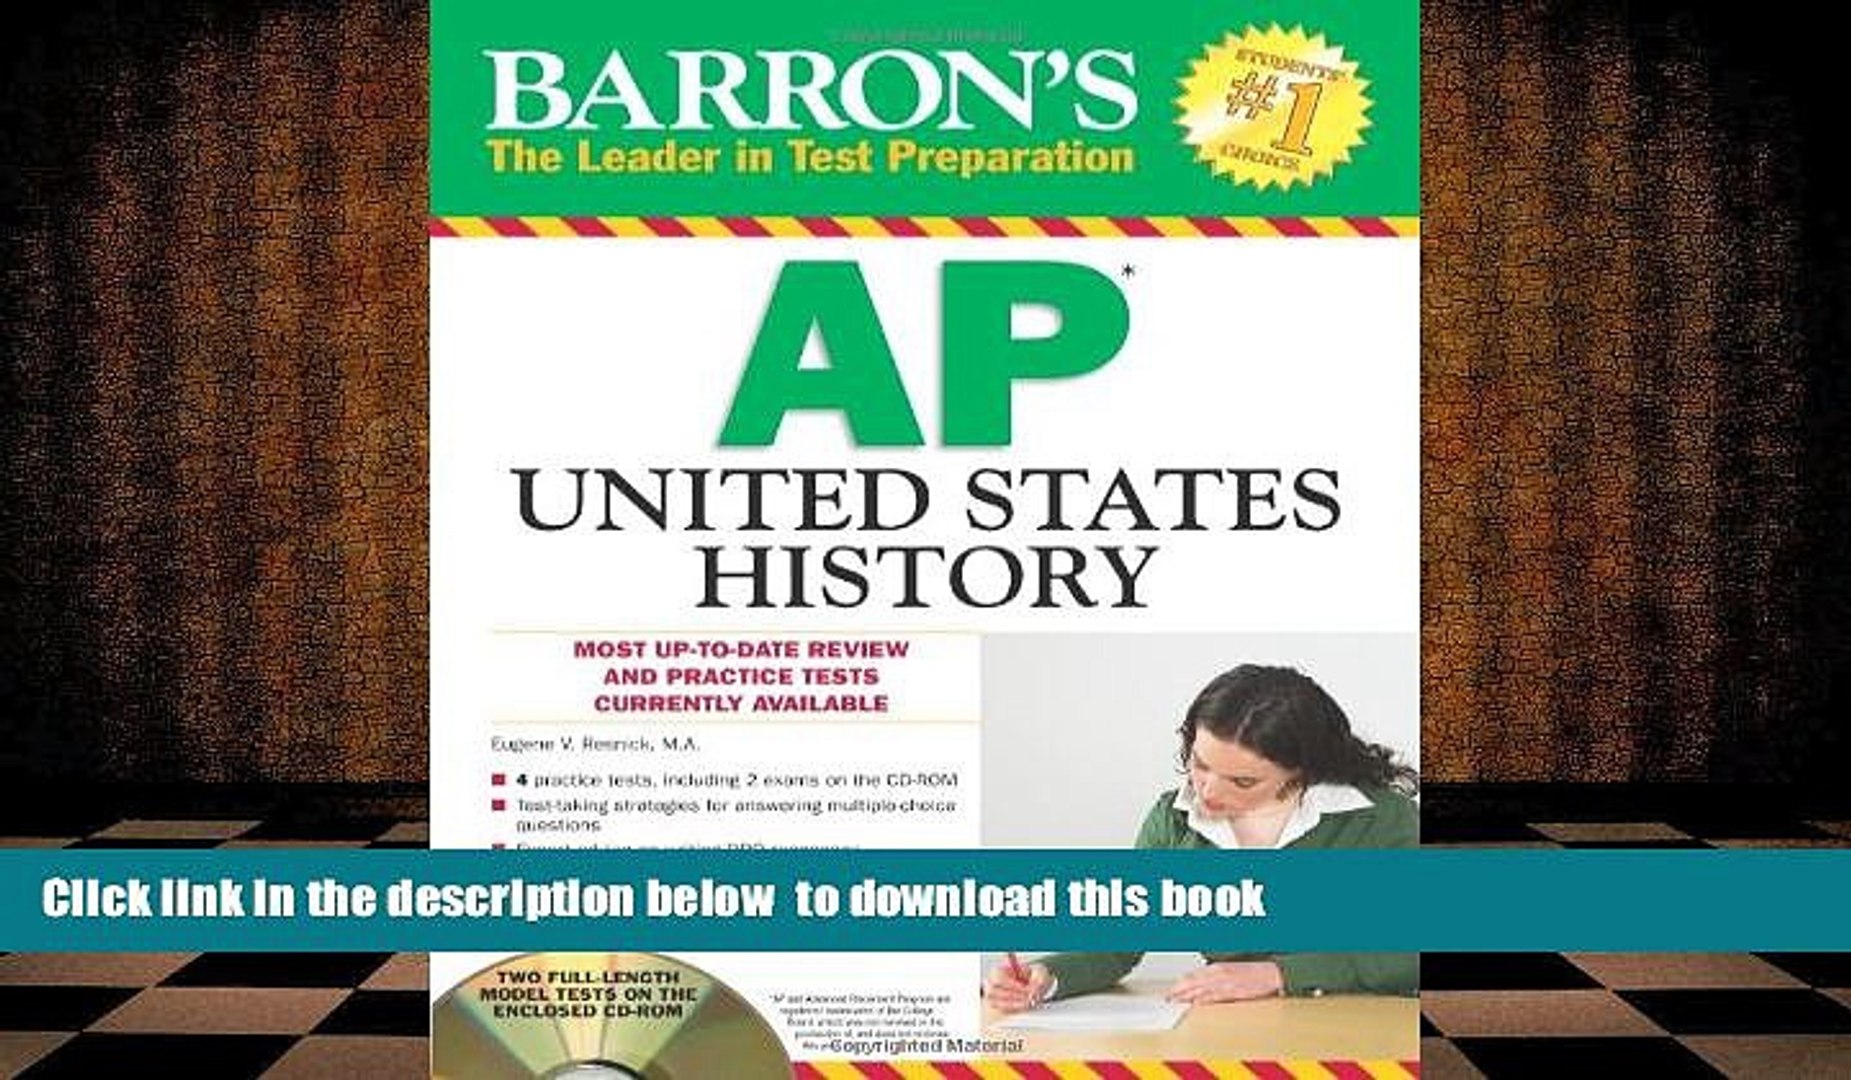 Barron's AP United States History with CD-ROM